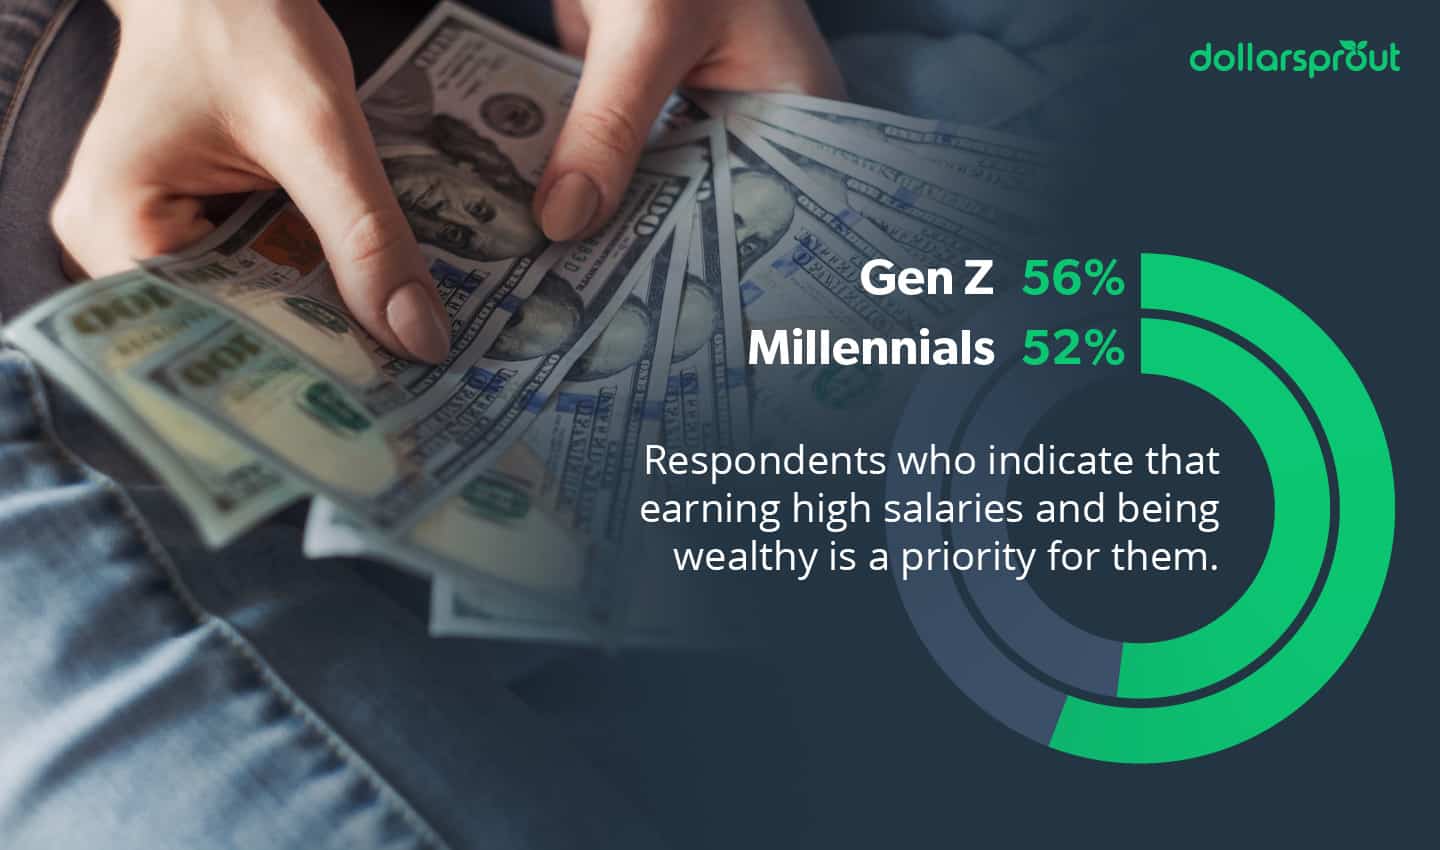 Respondents who indicate that earning high salaries and being wealthy is a priority for them.